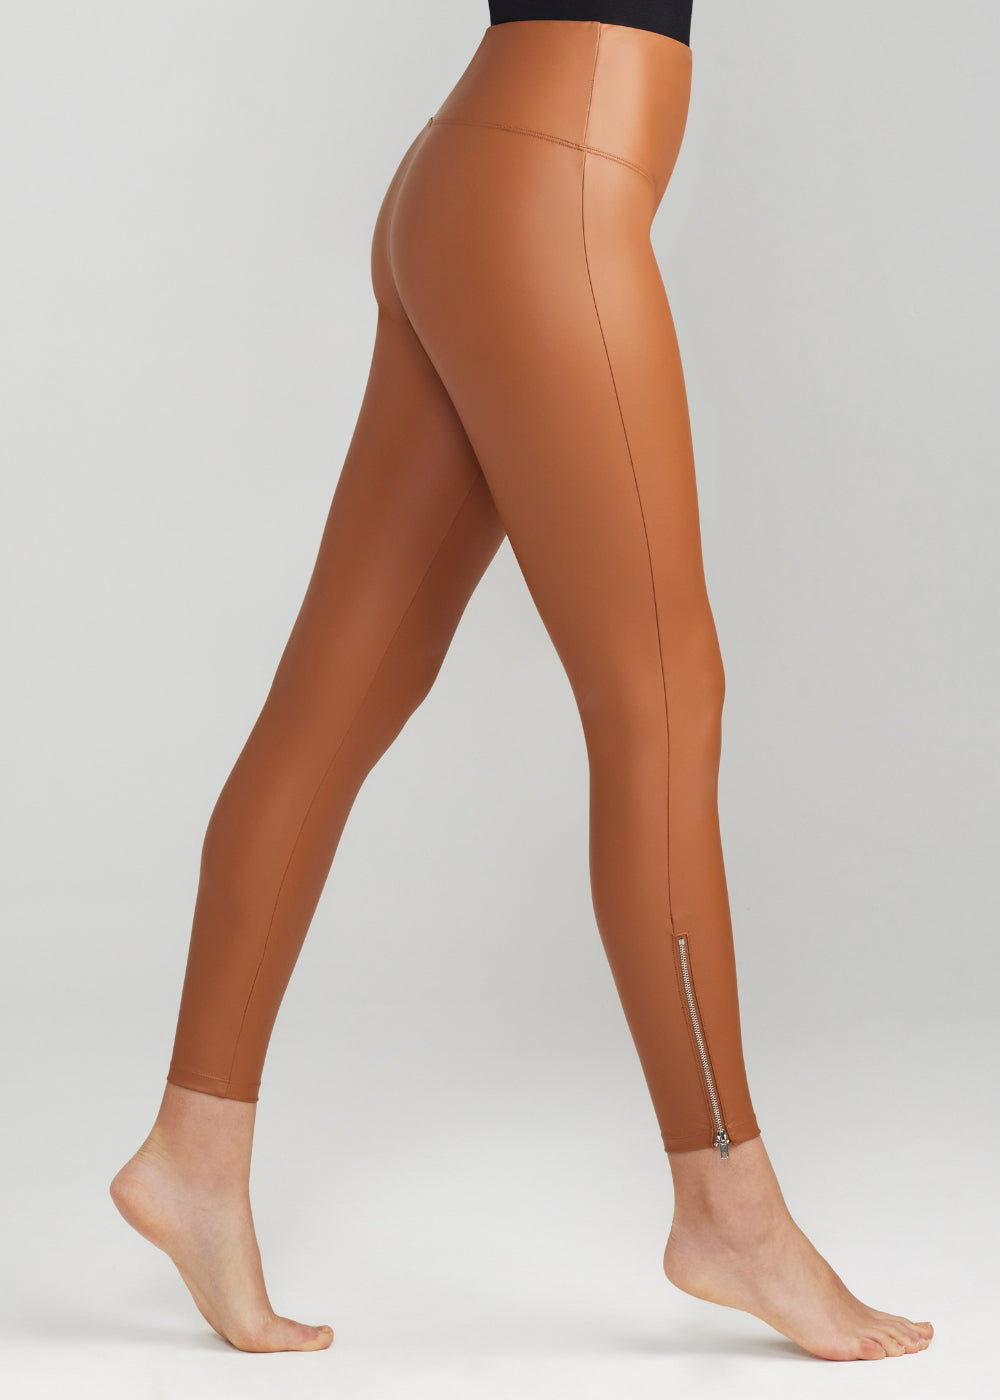 Faux Leather Shaping Legging with Side Zip from Yummie in Rawhide Tan  - 1